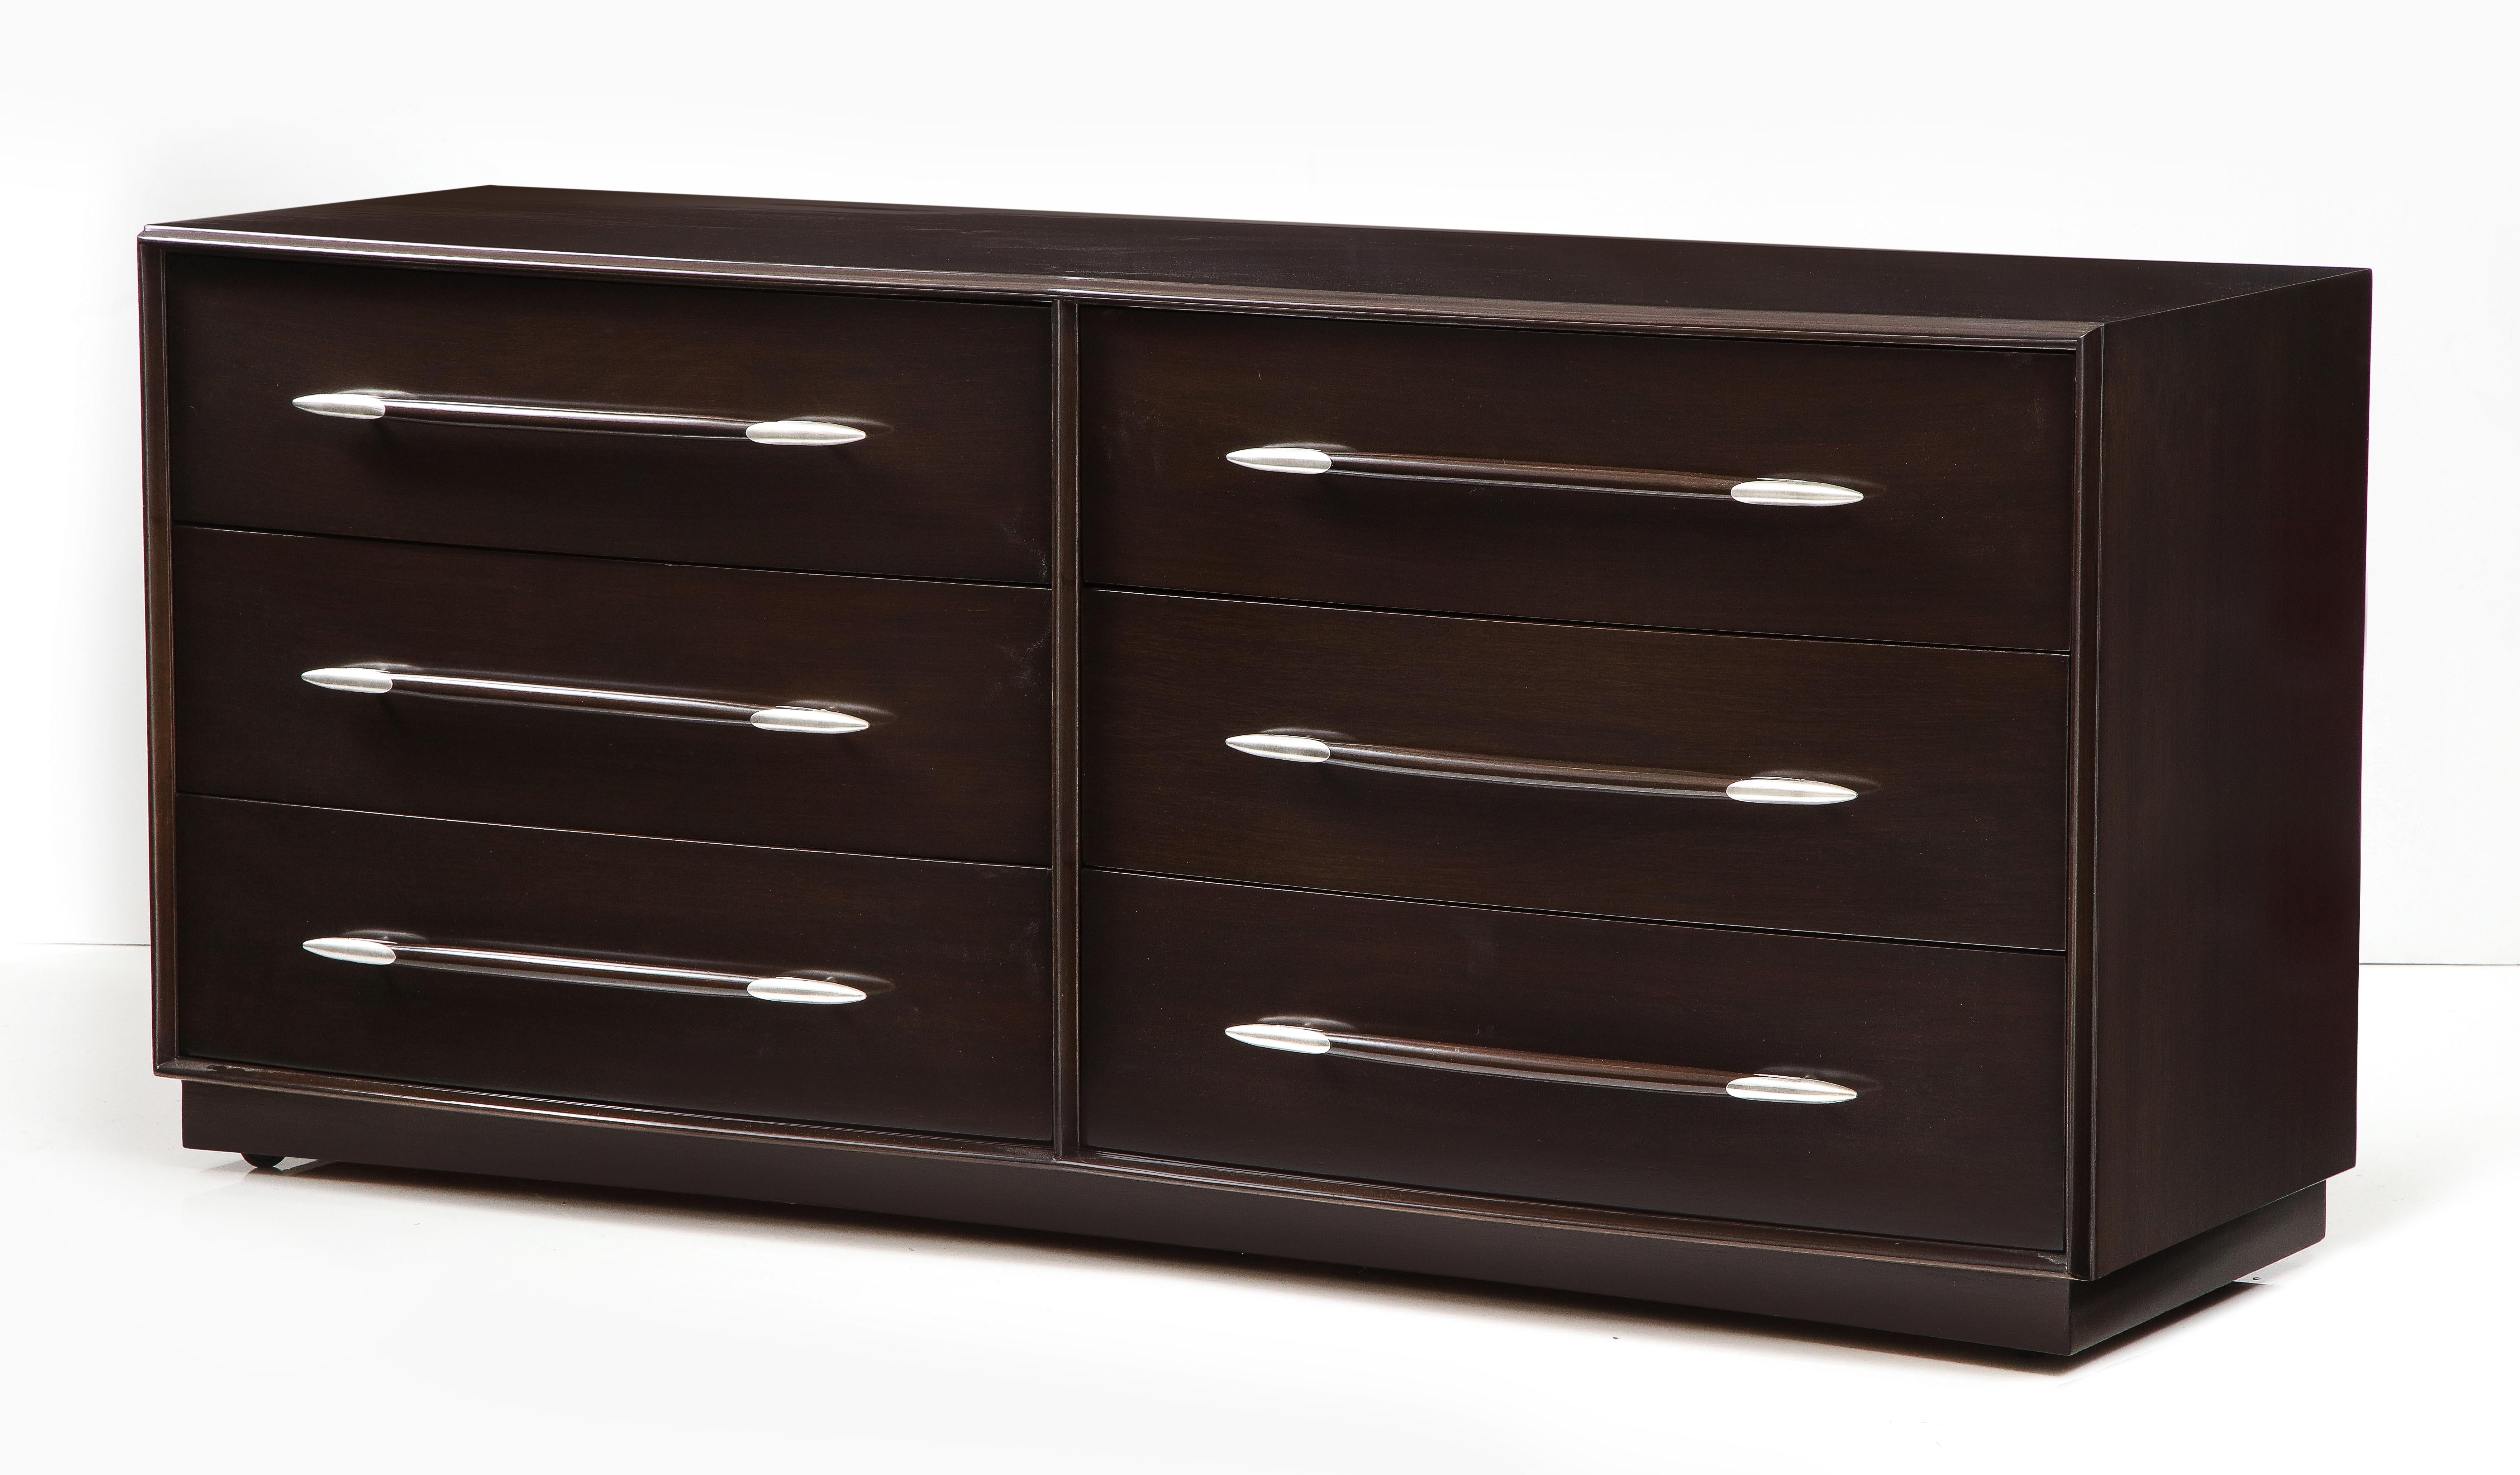 Midcentury 6-drawer double bowed front Walnut dresser in a custom dark chocolate brown stain with stylized spear handles tipped in nickel points.